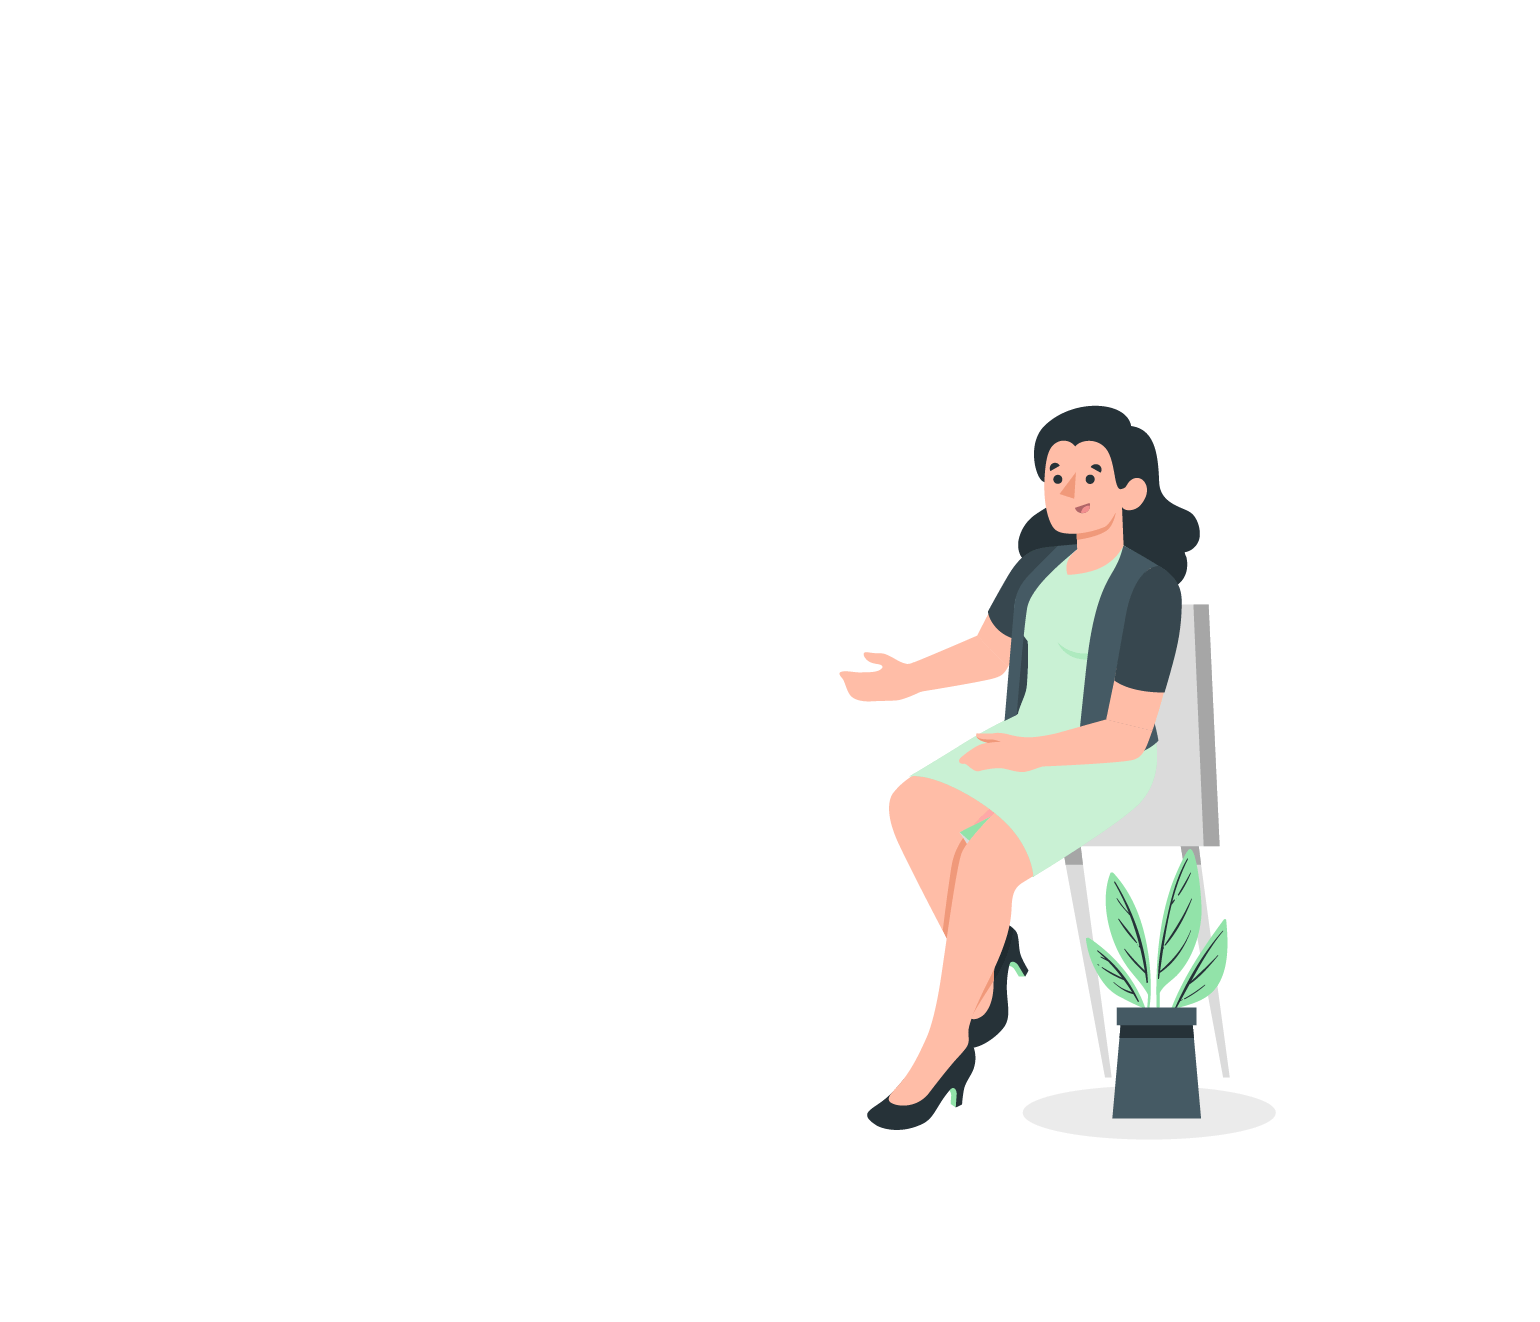 hooman sat down in green with plant illustration